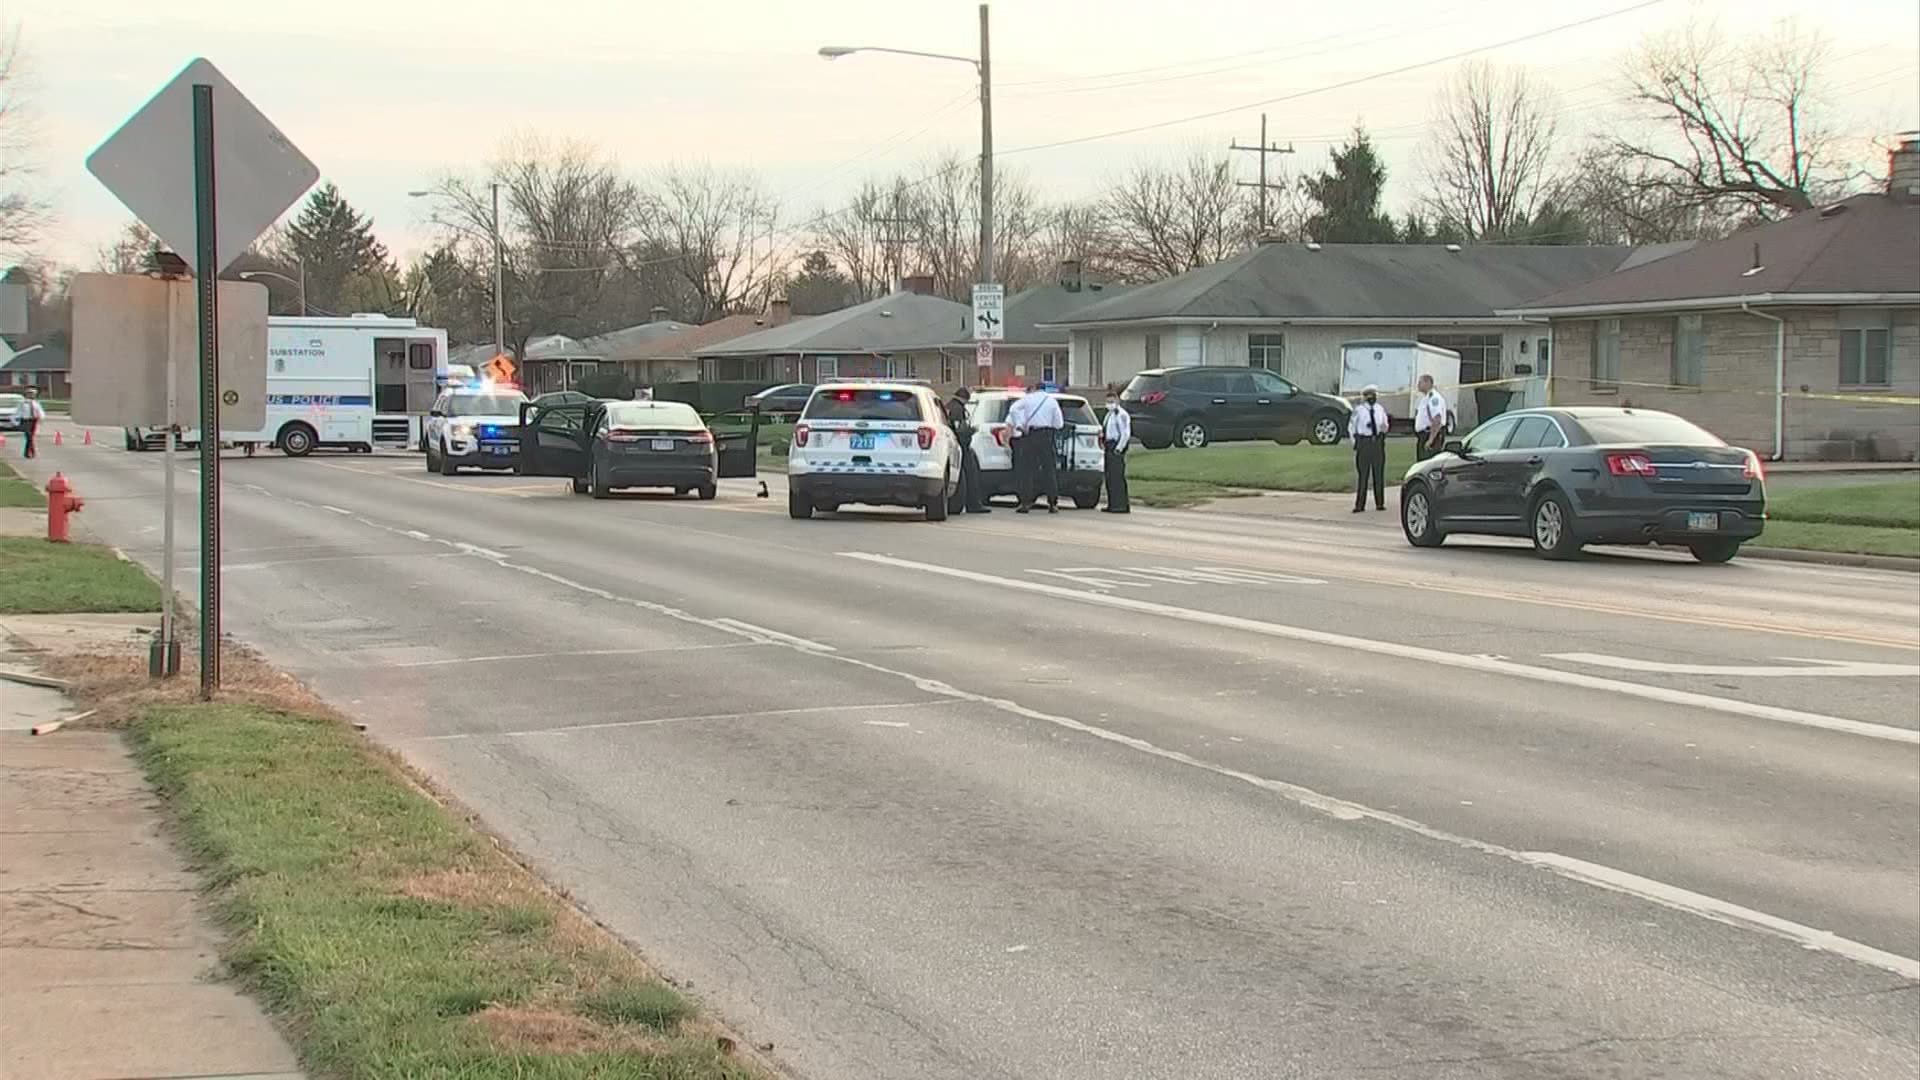 Two suspects are in custody in connection to the shooting along East Livingston Avenue.